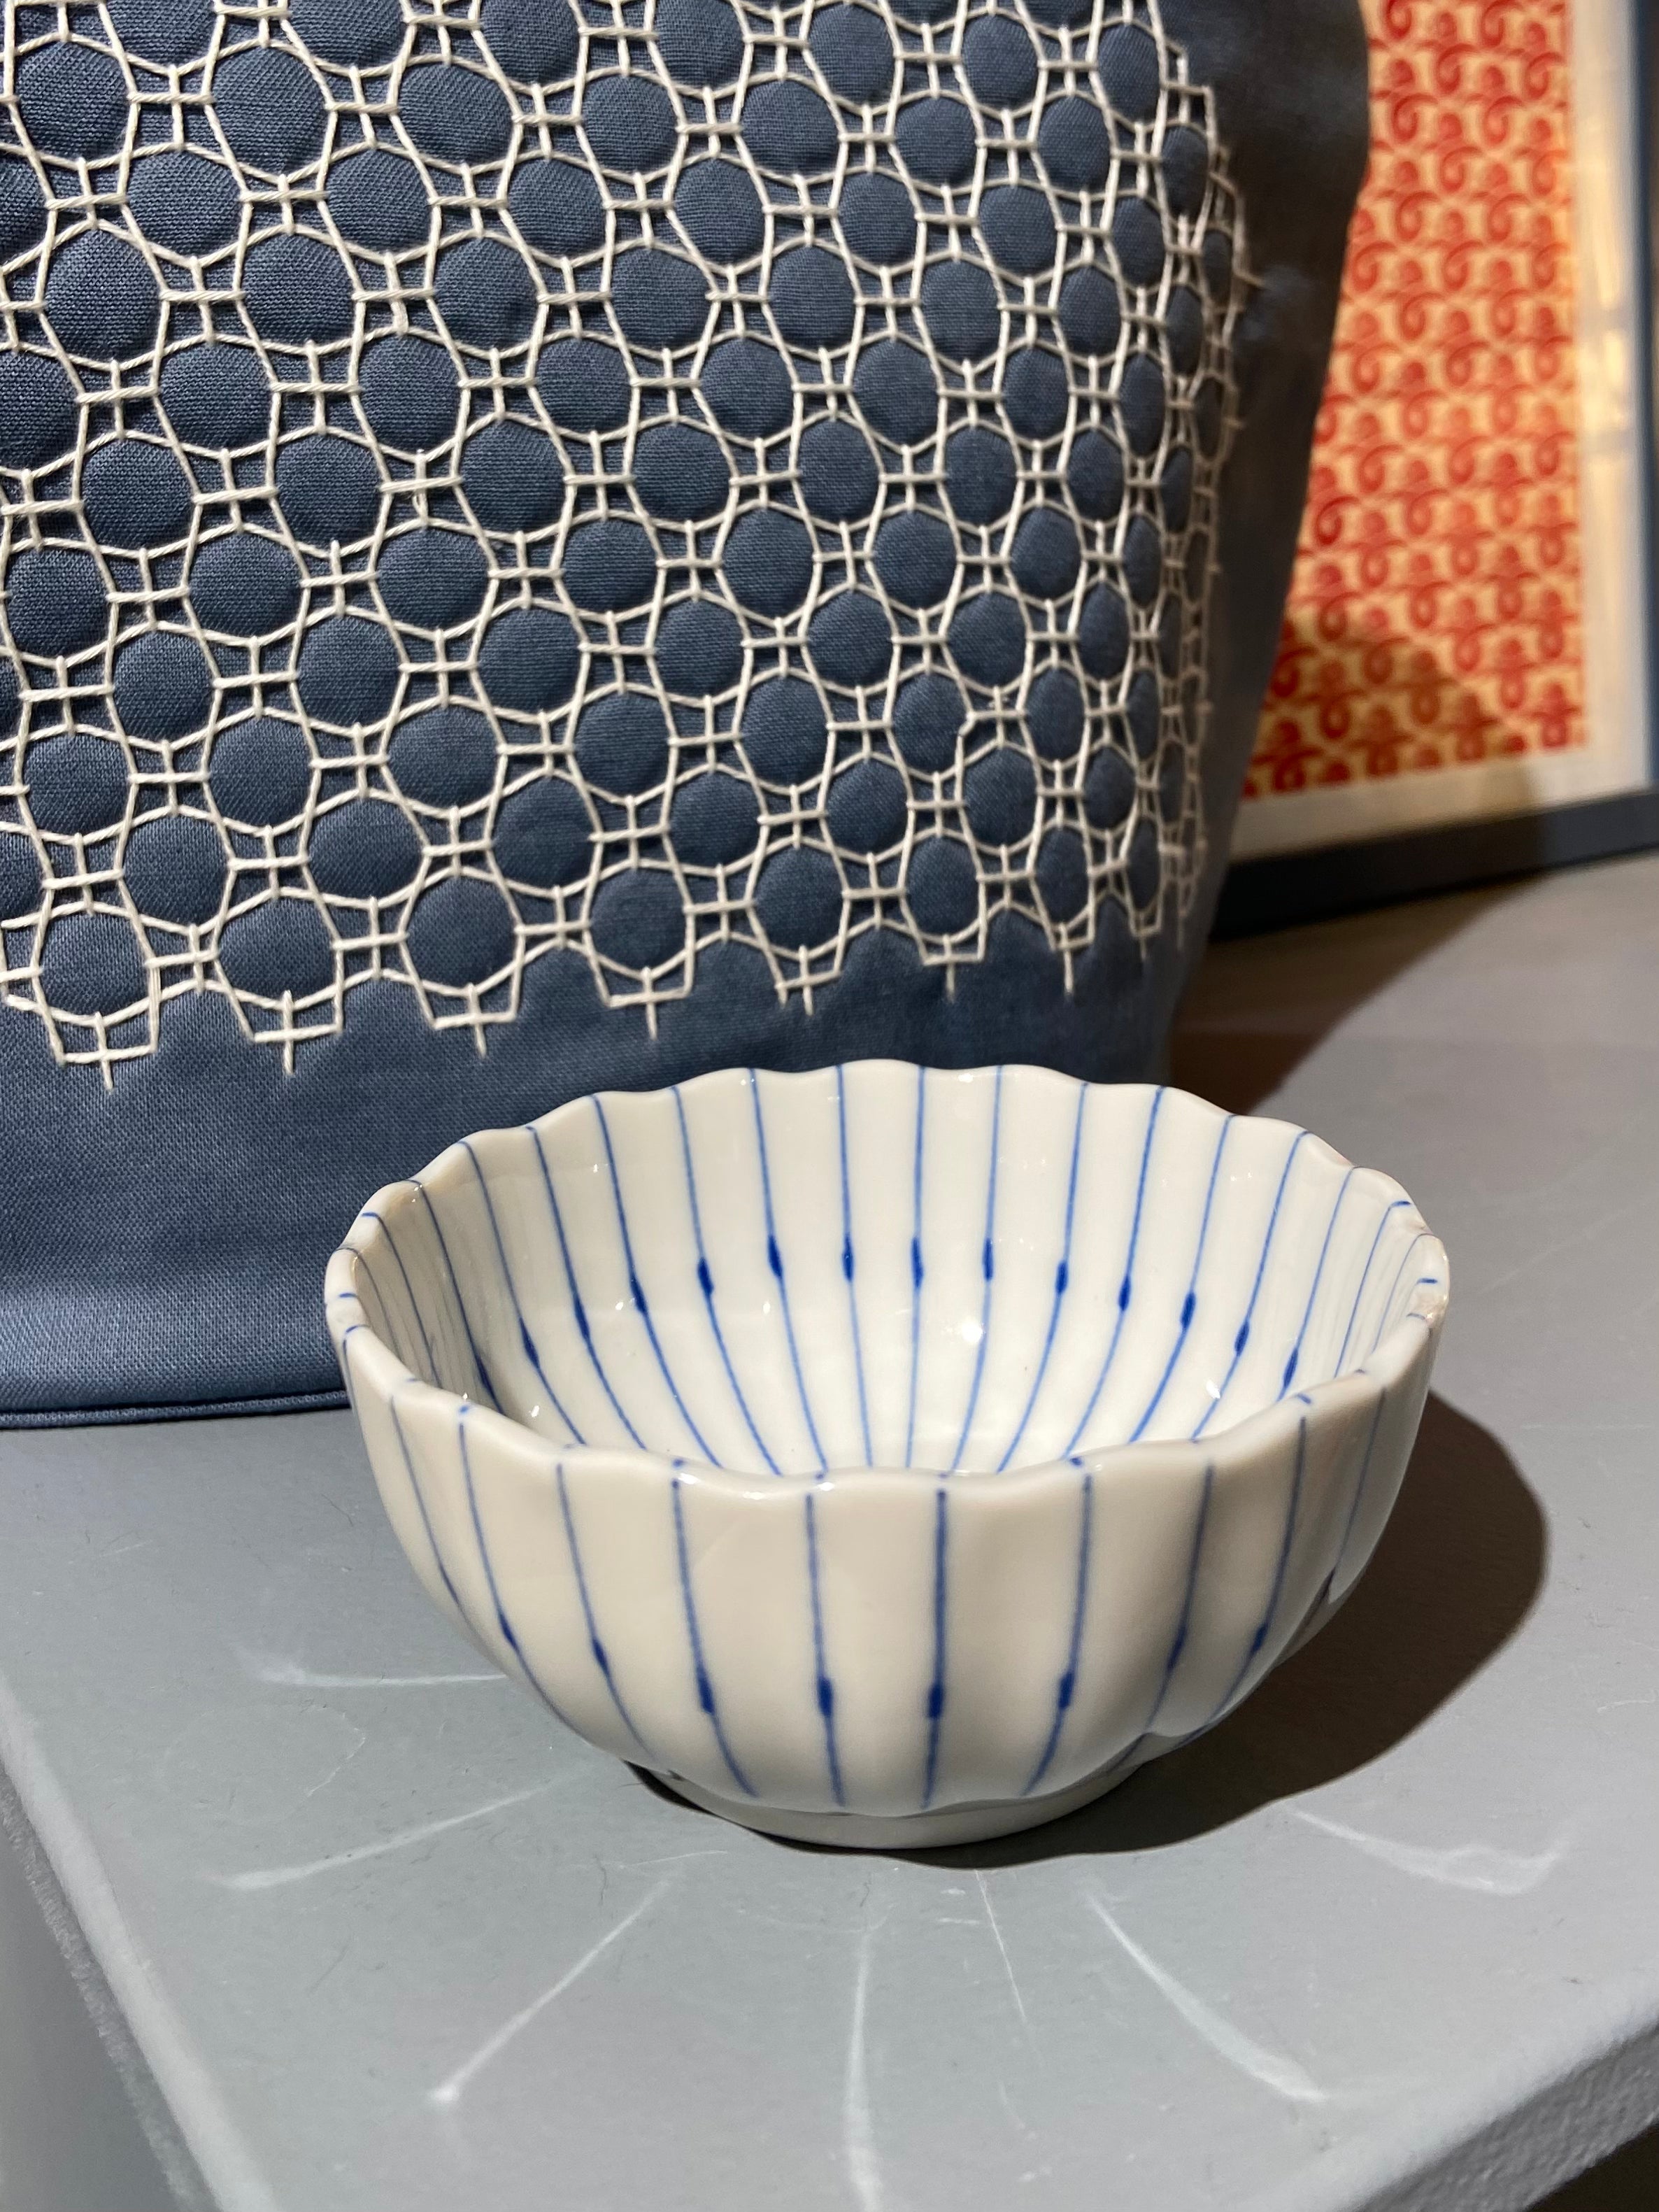 Small white bowl with blue stripes